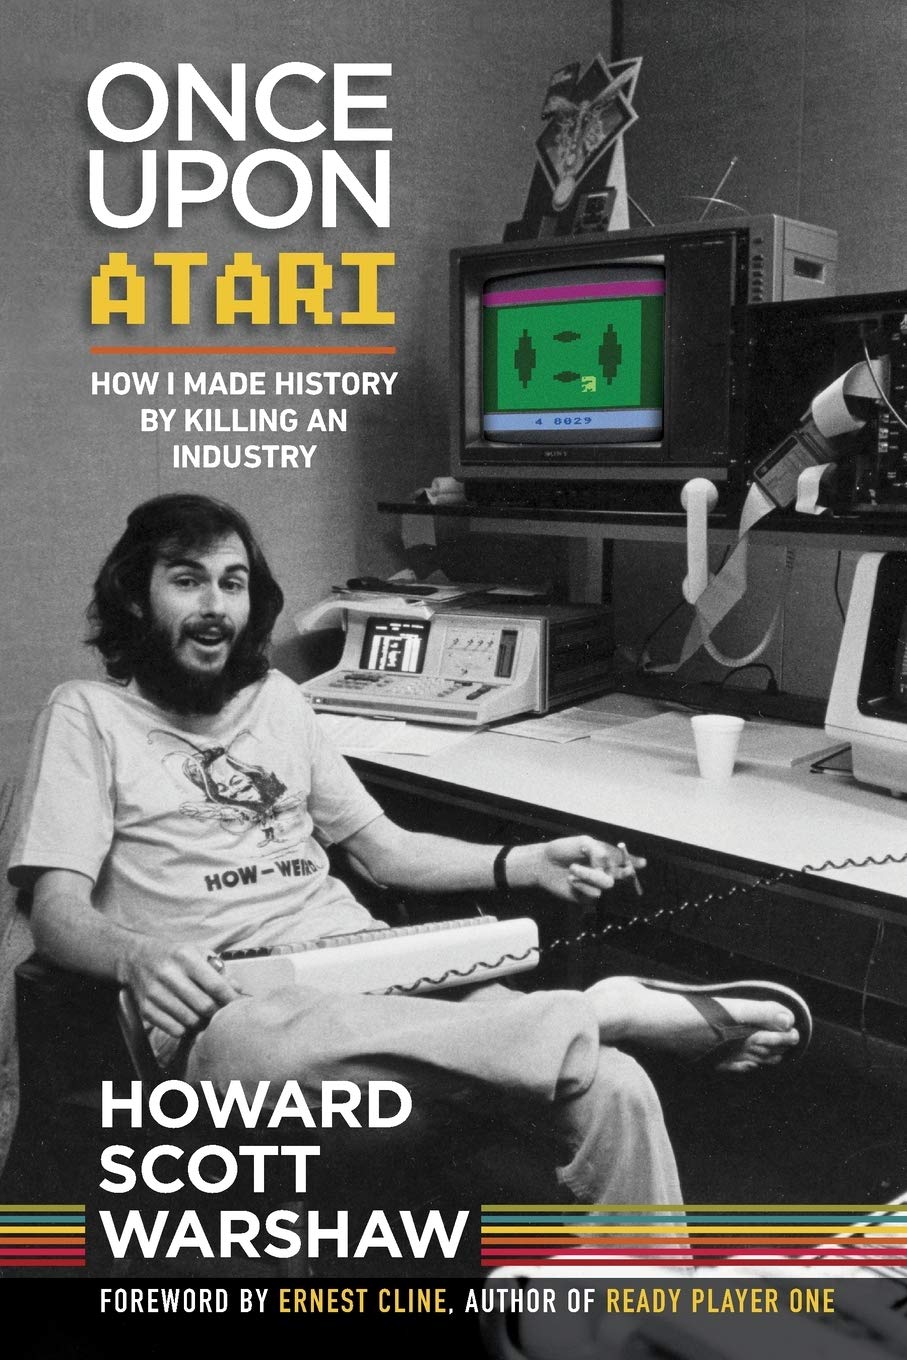 Book cover for "Once Upon Atari: How I Made History By Killing An Industry" by Howard Scott Warshaw